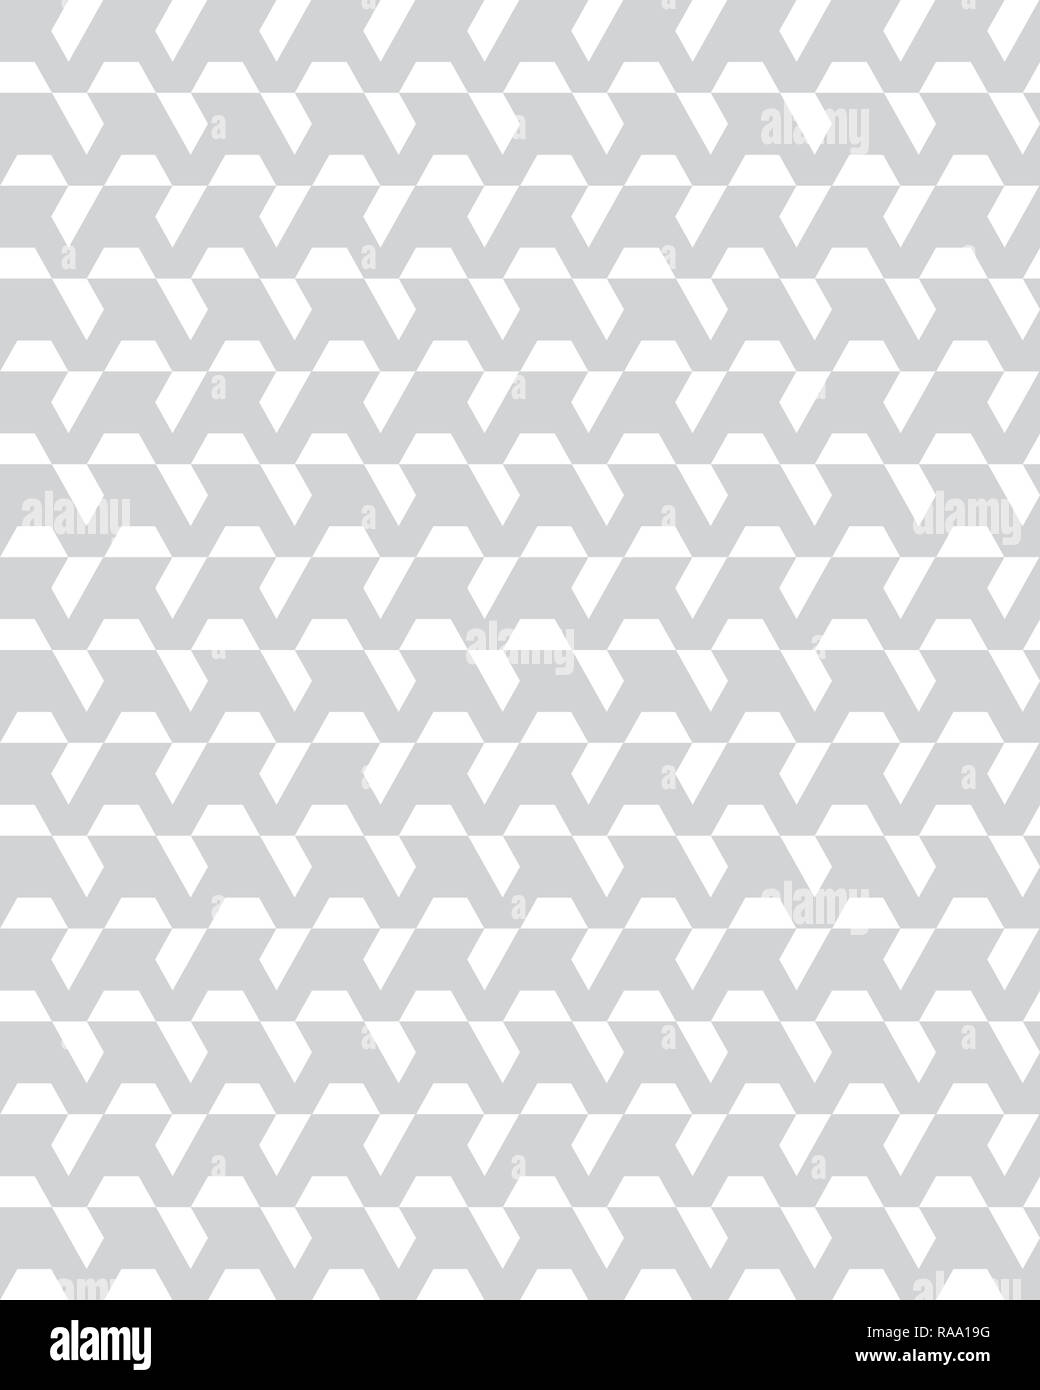 Seamless monochrome geometric patterns, design for packaging, print, covers, cards, wrapping, fabric, paper, interior Stock Photo